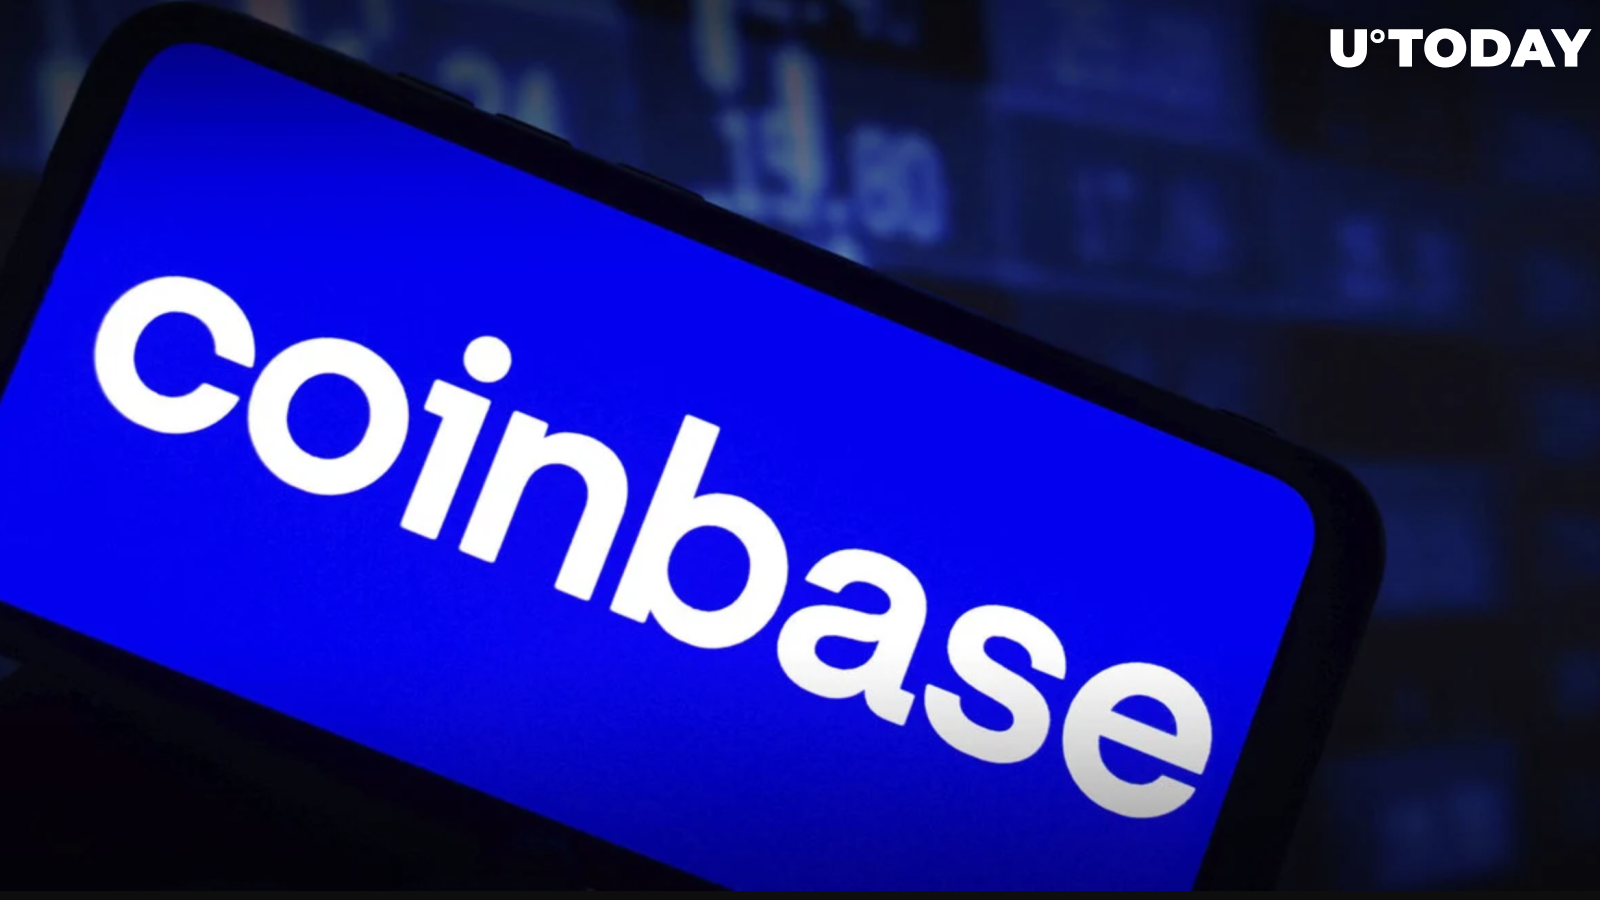 Perpetual Futures for Shiba Inu (SHIB) and Other Meme Coins Added by Coinbase